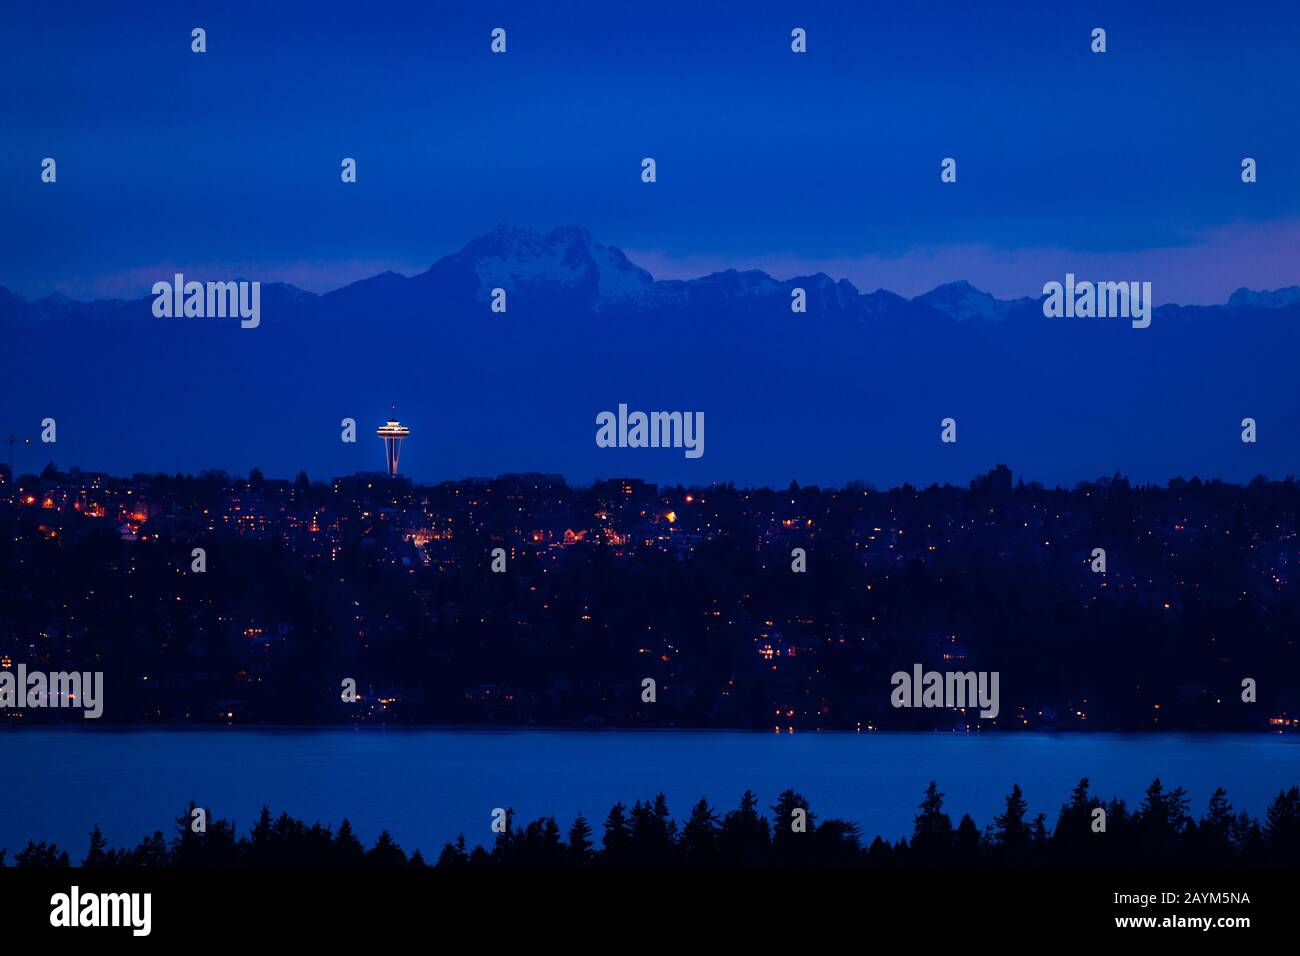 View of Seattle town at night and mountain Olympus on background with homes, lake Washington in front from Bellevue, WA, USA Stock Photo